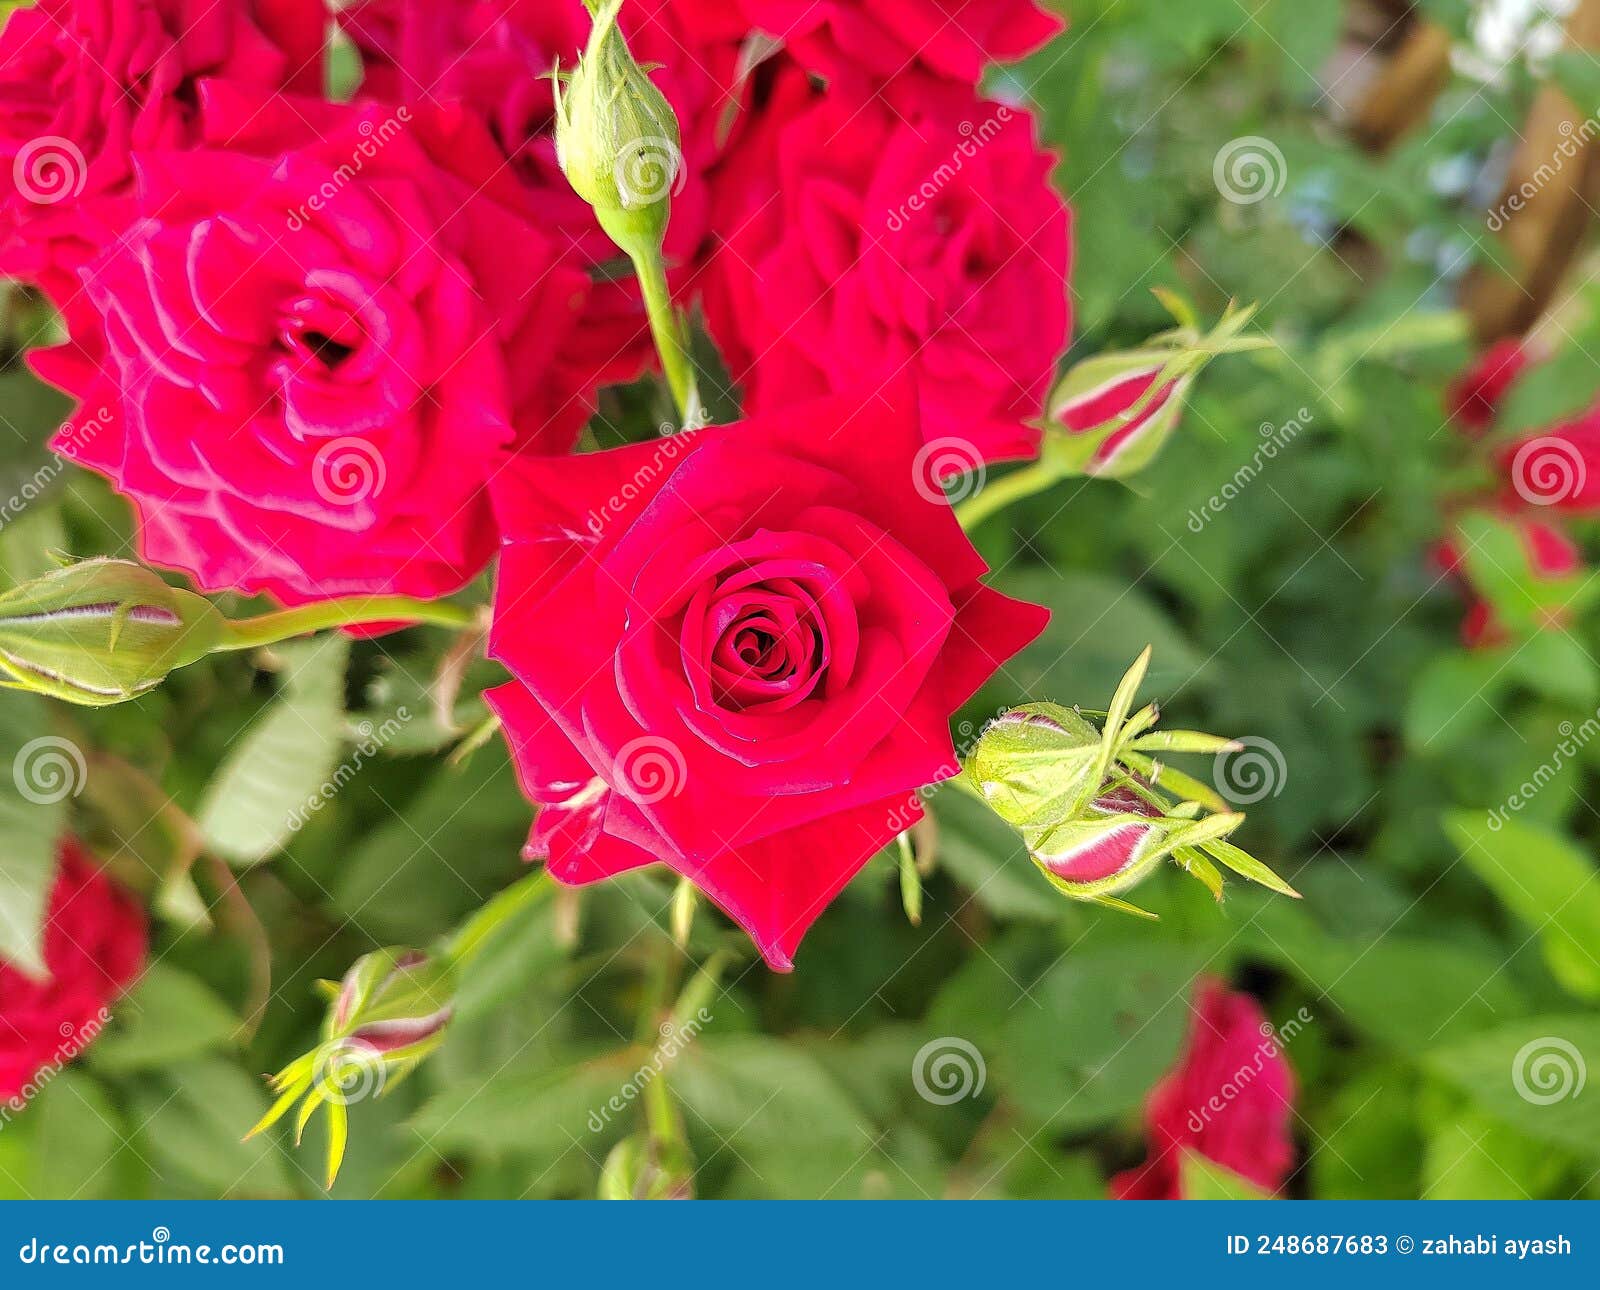 Free Images : flower, romance, background, beautiful, valentine, bloom,  bush, nature, beauty, love, blossom, black, color, romantic, spring,  decoration, water, fresh, greeting, autumn red roses, green, petal, floral,  closeup, summer, gift, natural